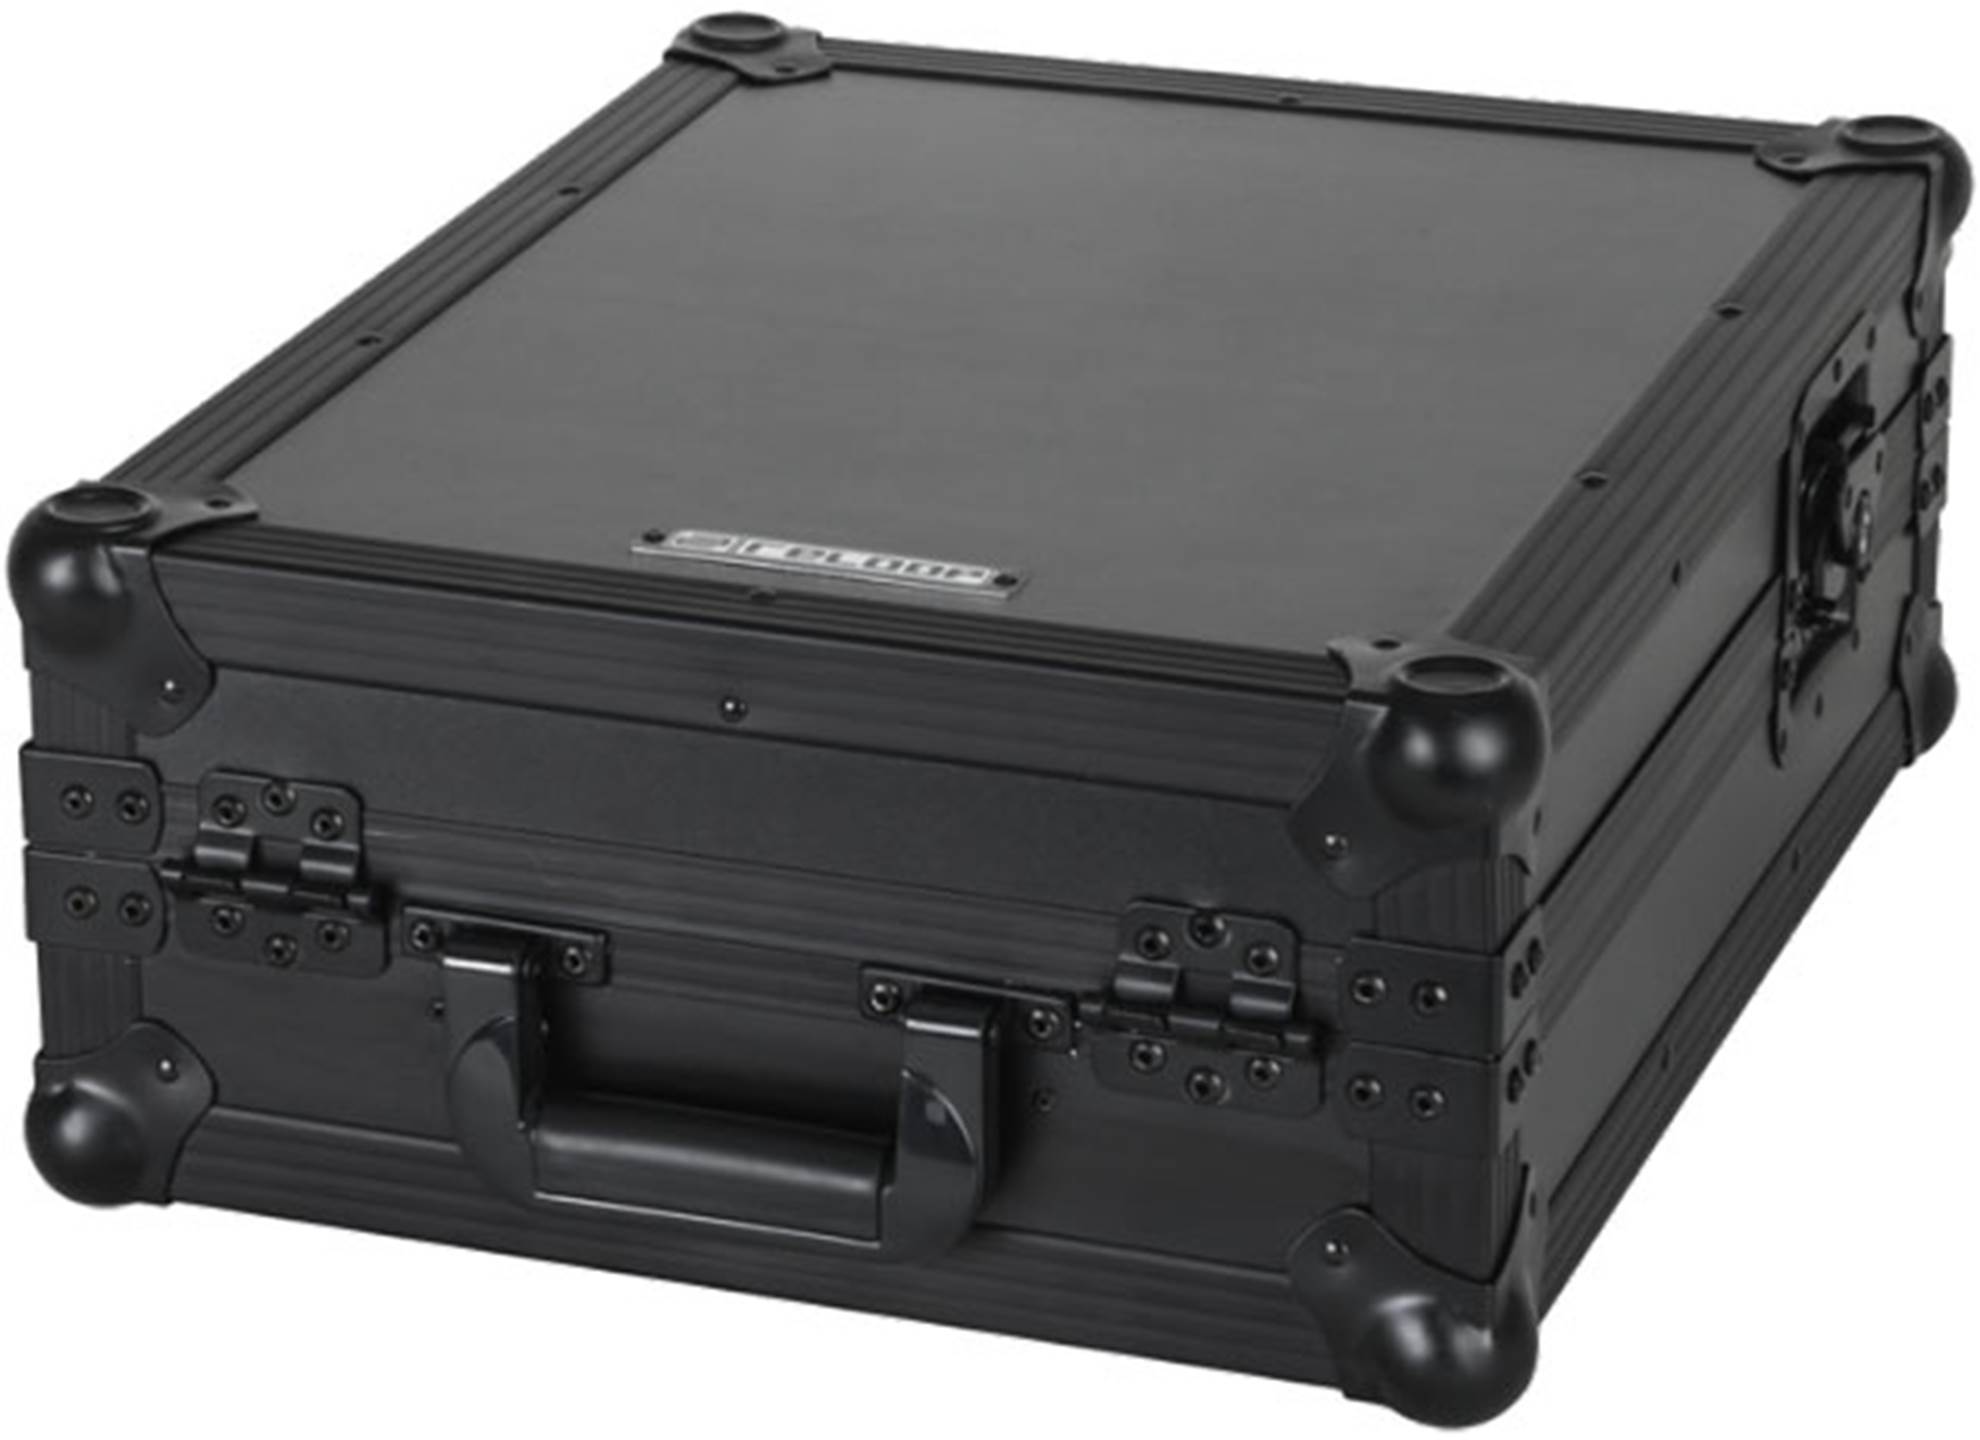 Tabletop CD Player Case